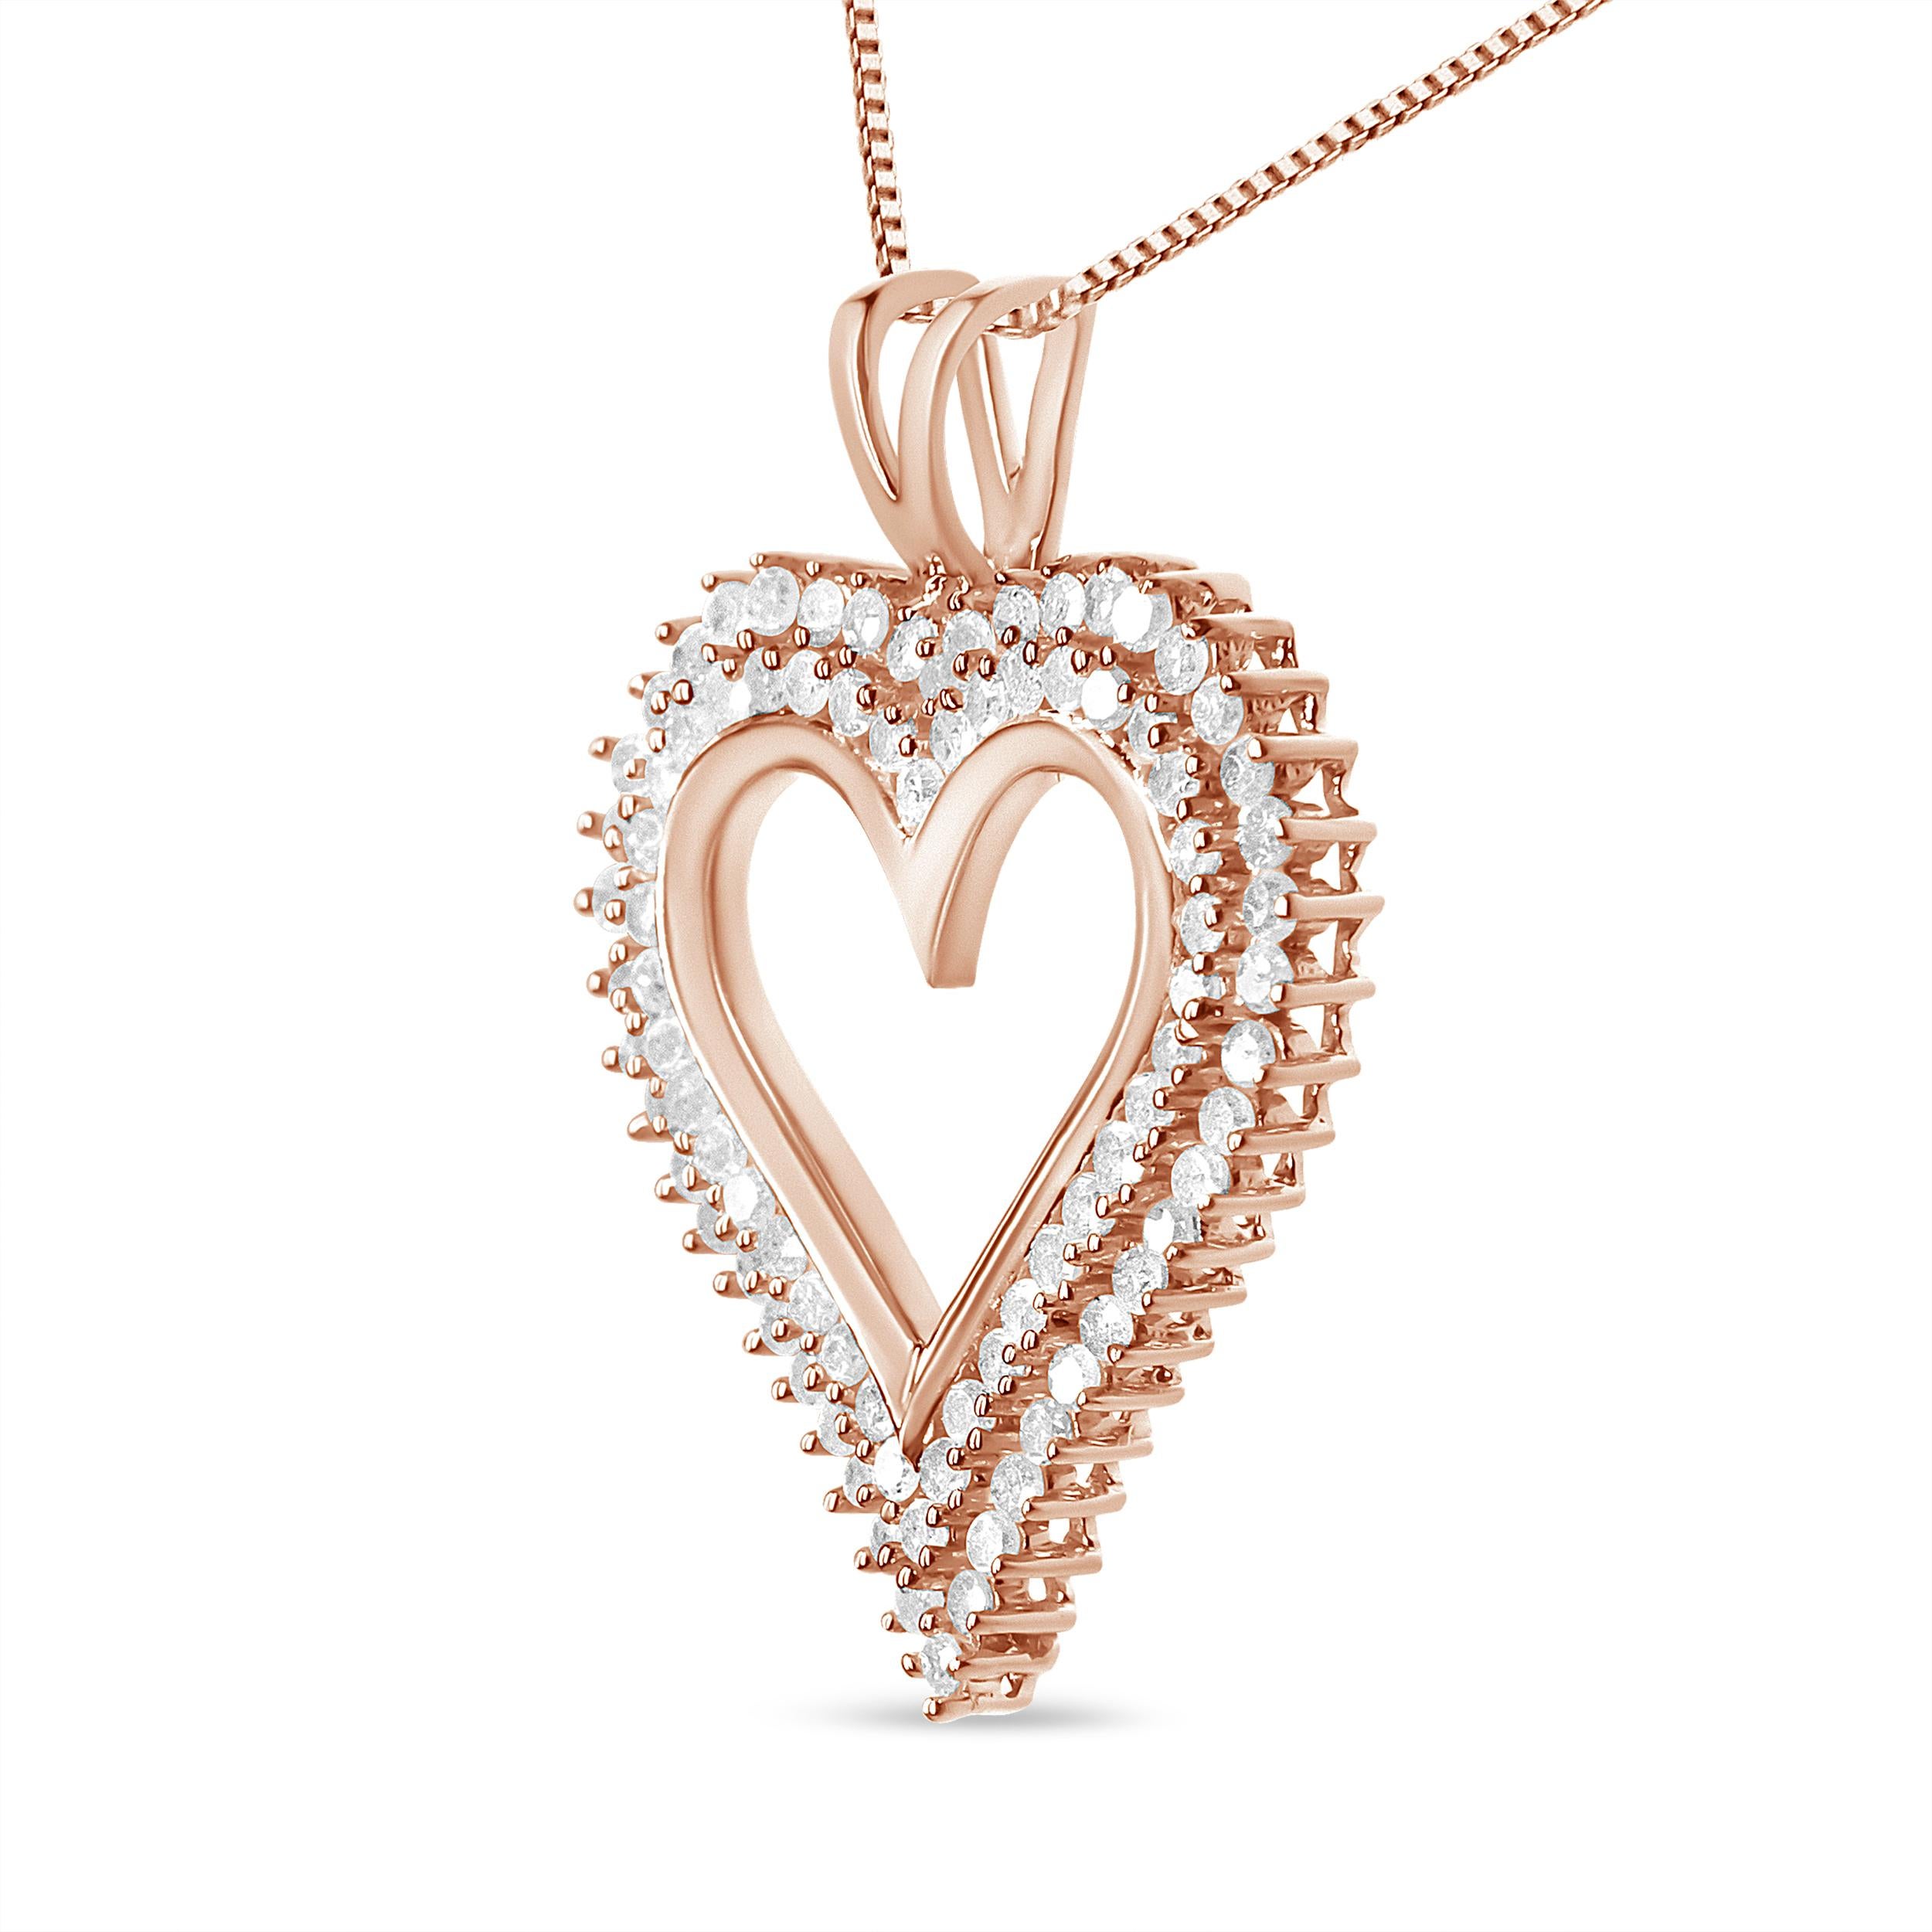 Contemporary 10K Rose Gold Plated Sterling Silver 3.0 Carat Diamond Heart Pendant Necklace For Sale